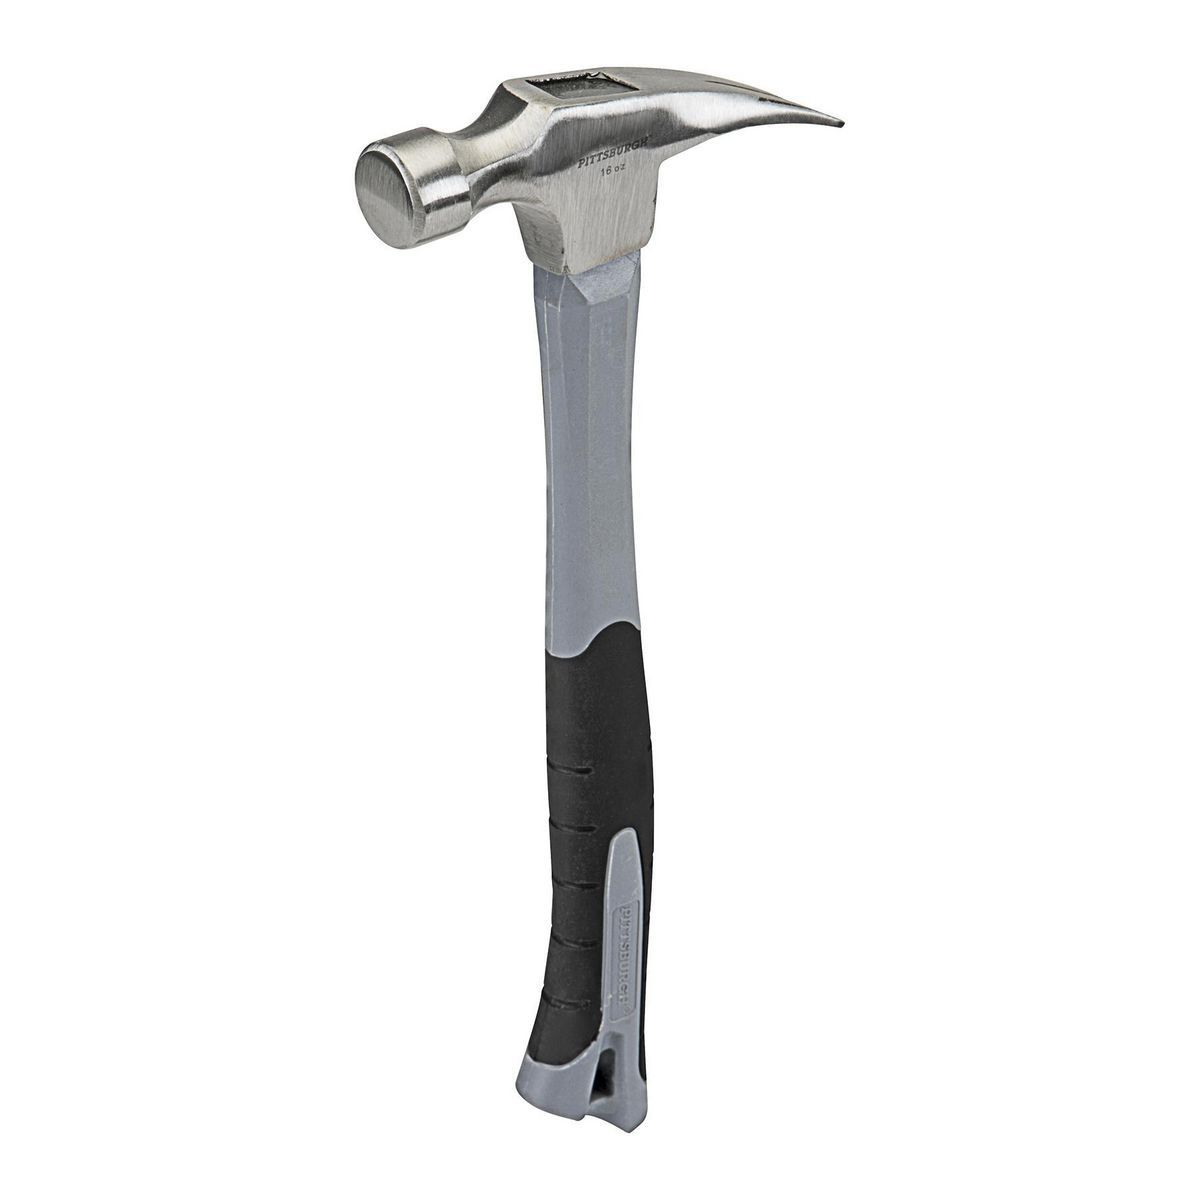 product image of Pittsburgh 16oz Fiberglass Rip Hammer sold at Harbor Freight